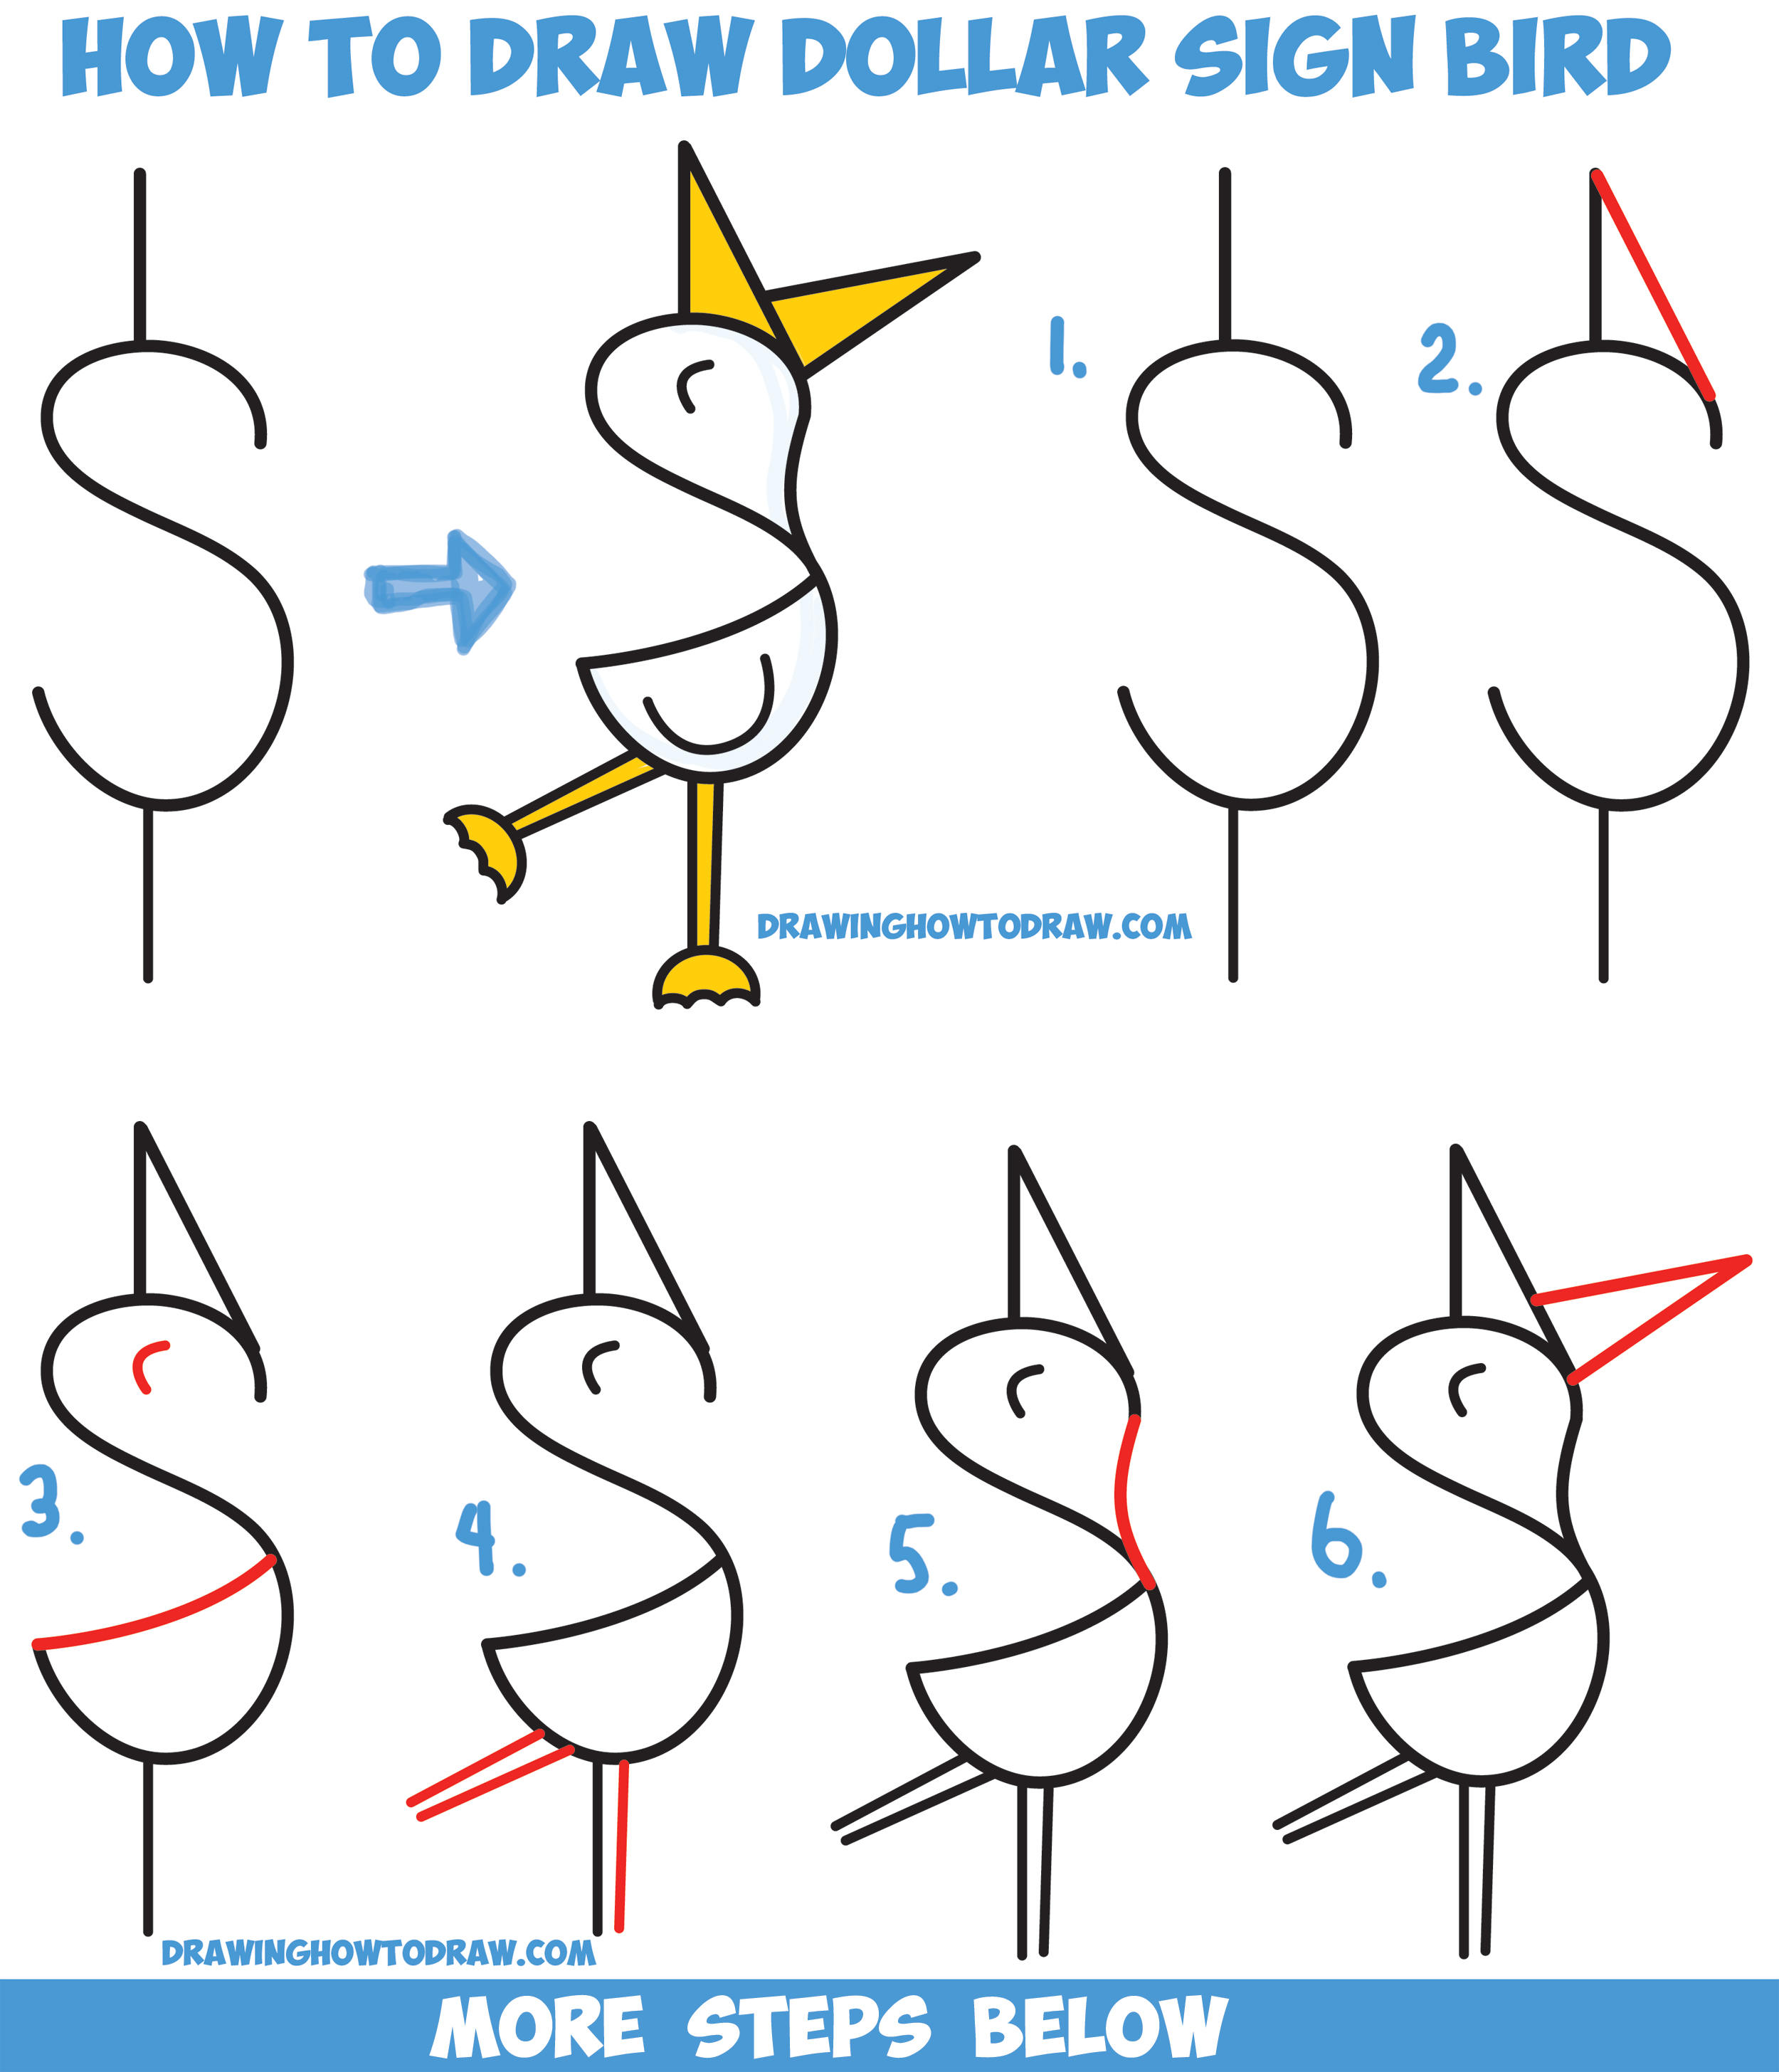 How to Draw a Cute Cartoon Bird / Duck from a Dollar Sign - Easy Step by Step Drawing Tutorial for Kids